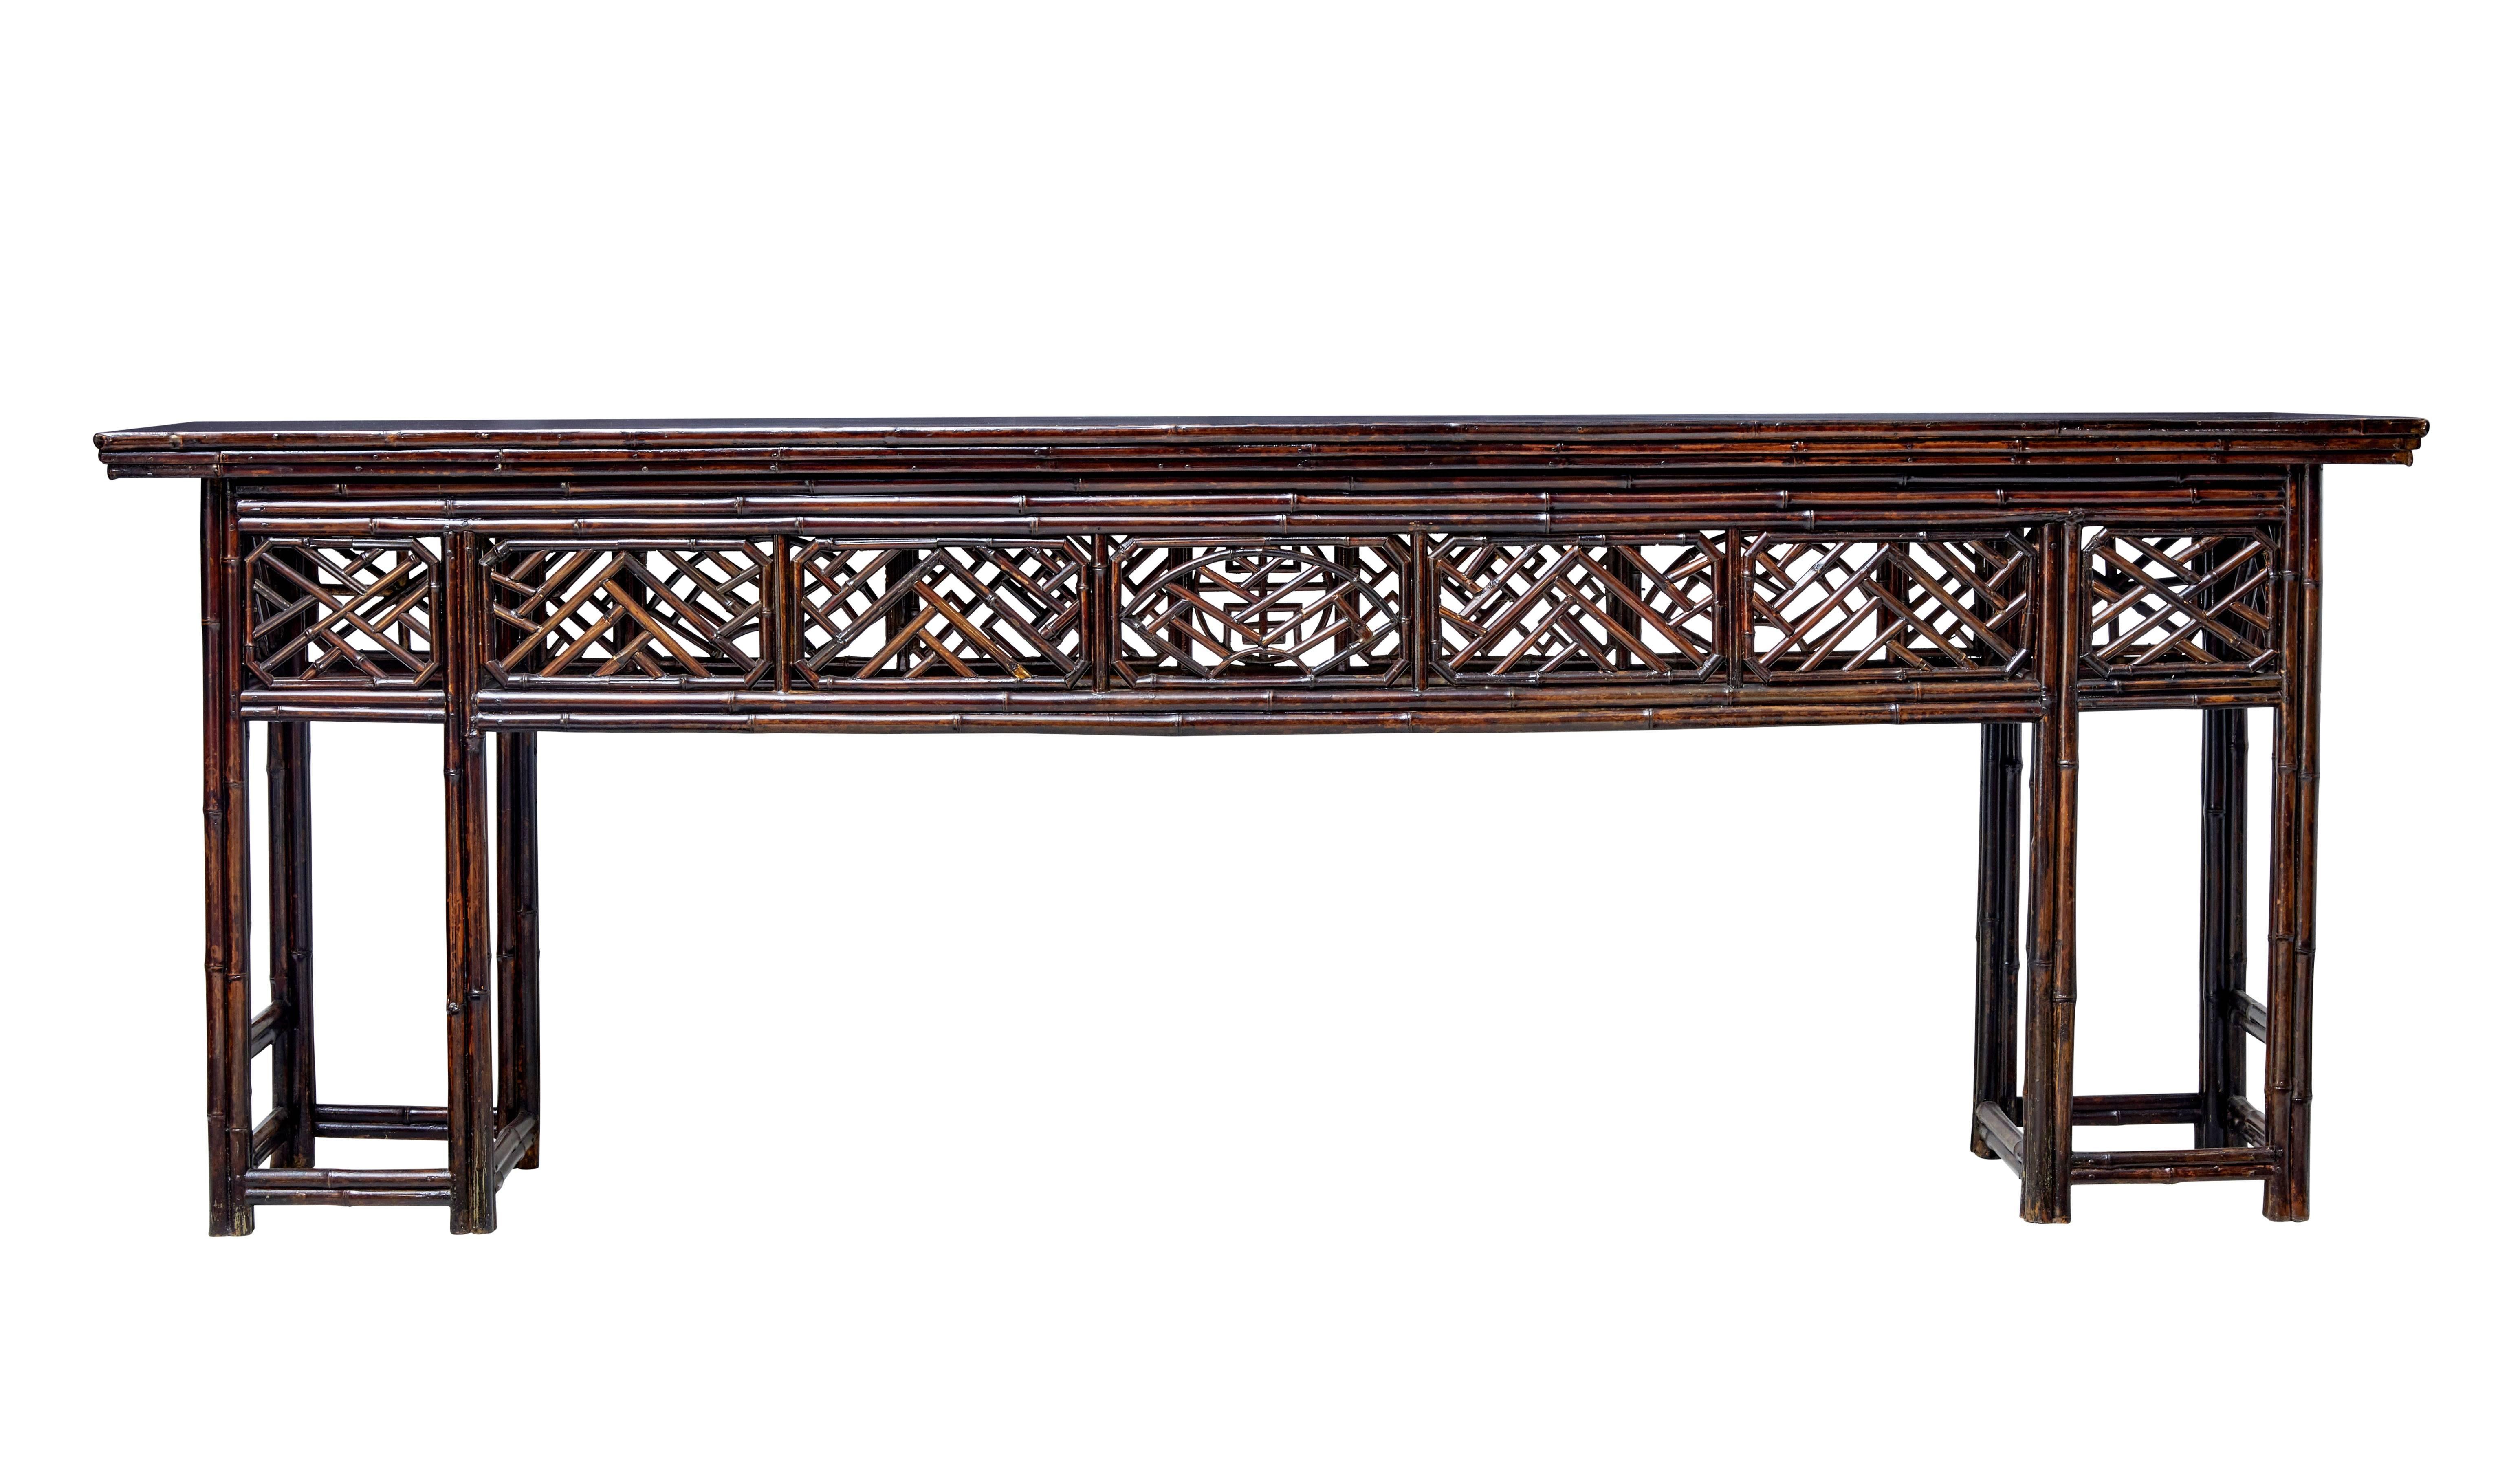 Chinese Export Large Late 19th Century Chinese Cane and Lacquer Consol Table